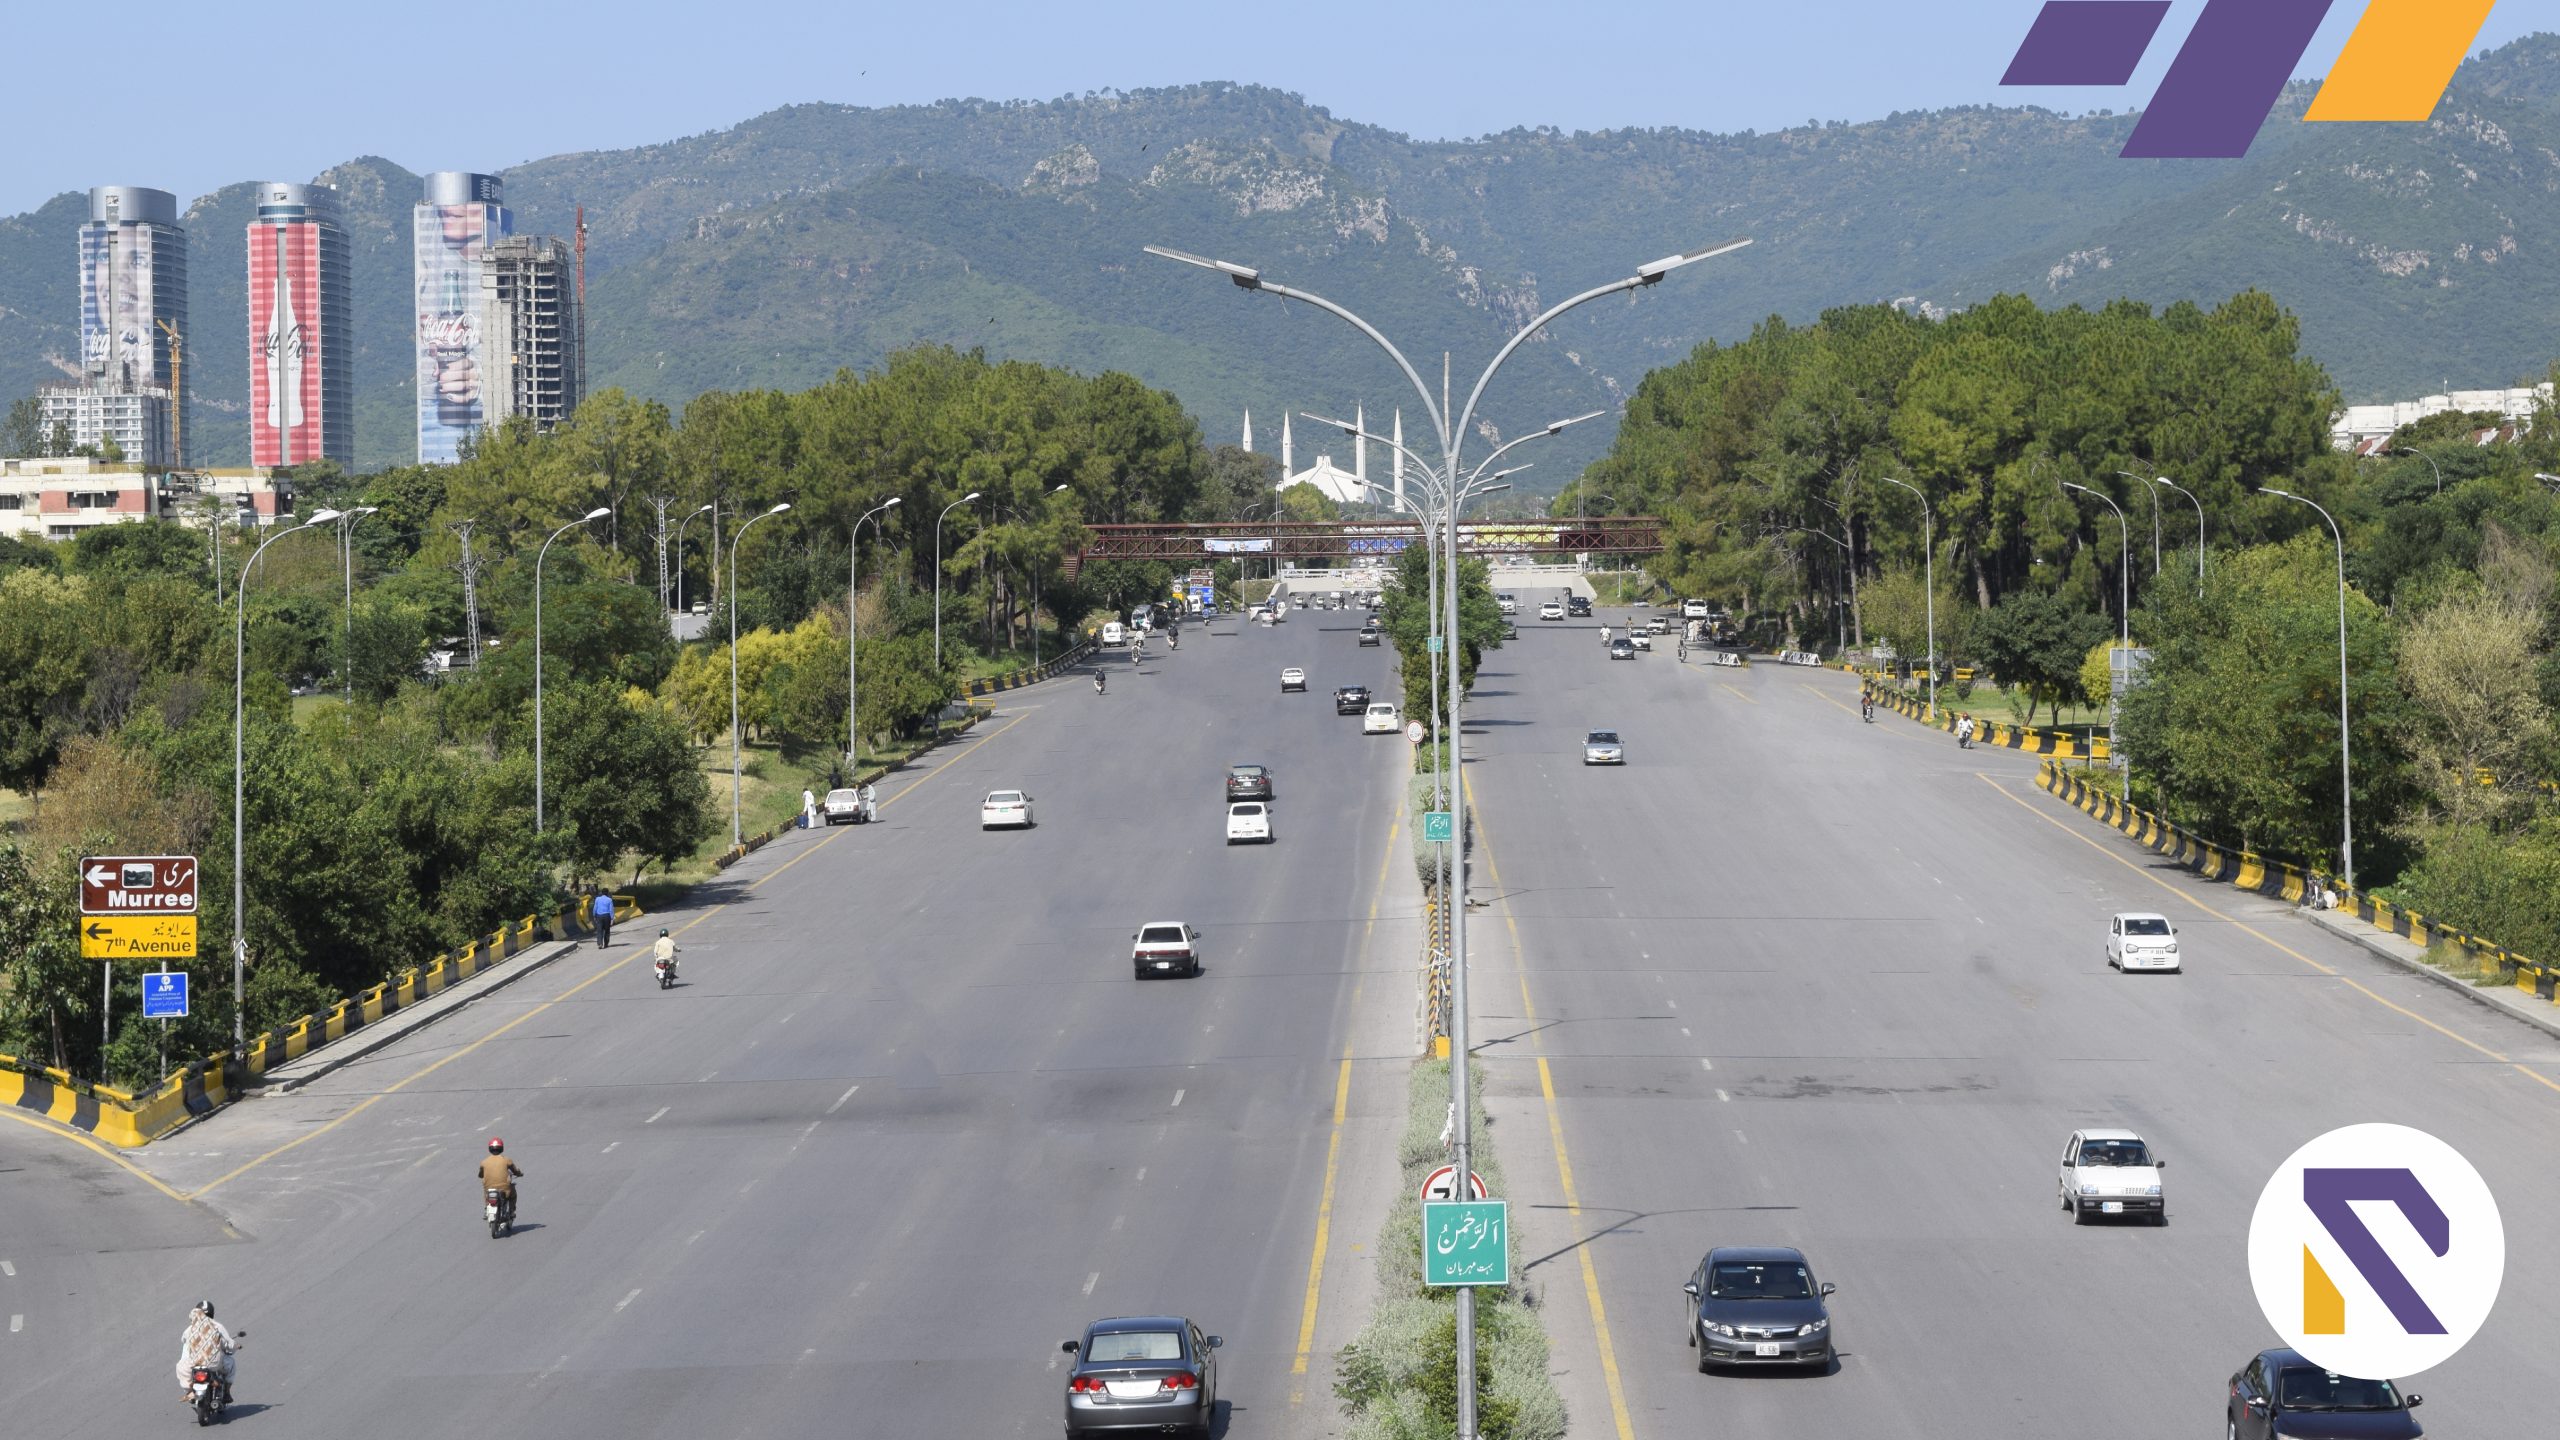 CDA Plans to Construct 11th Avenue for Smooth Traffic Flow